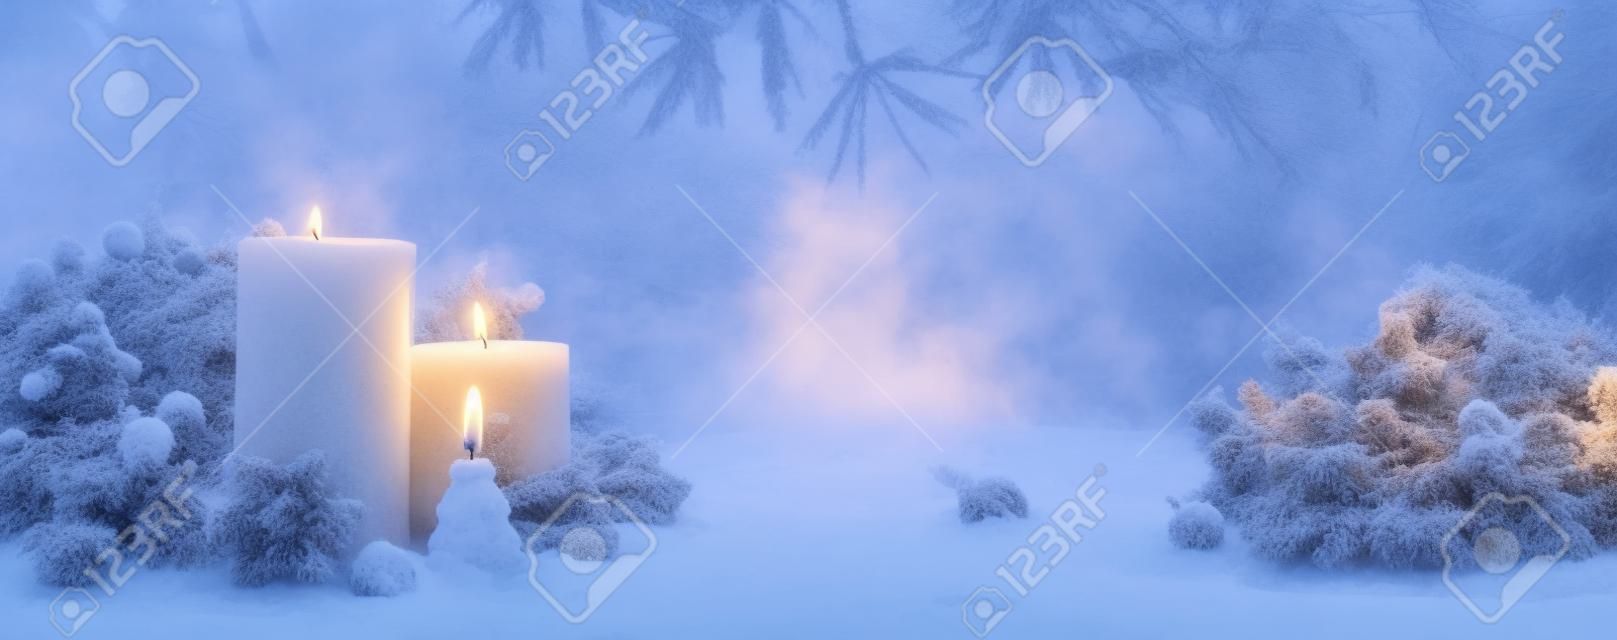 Winter Forest Landscape With Burning Candles